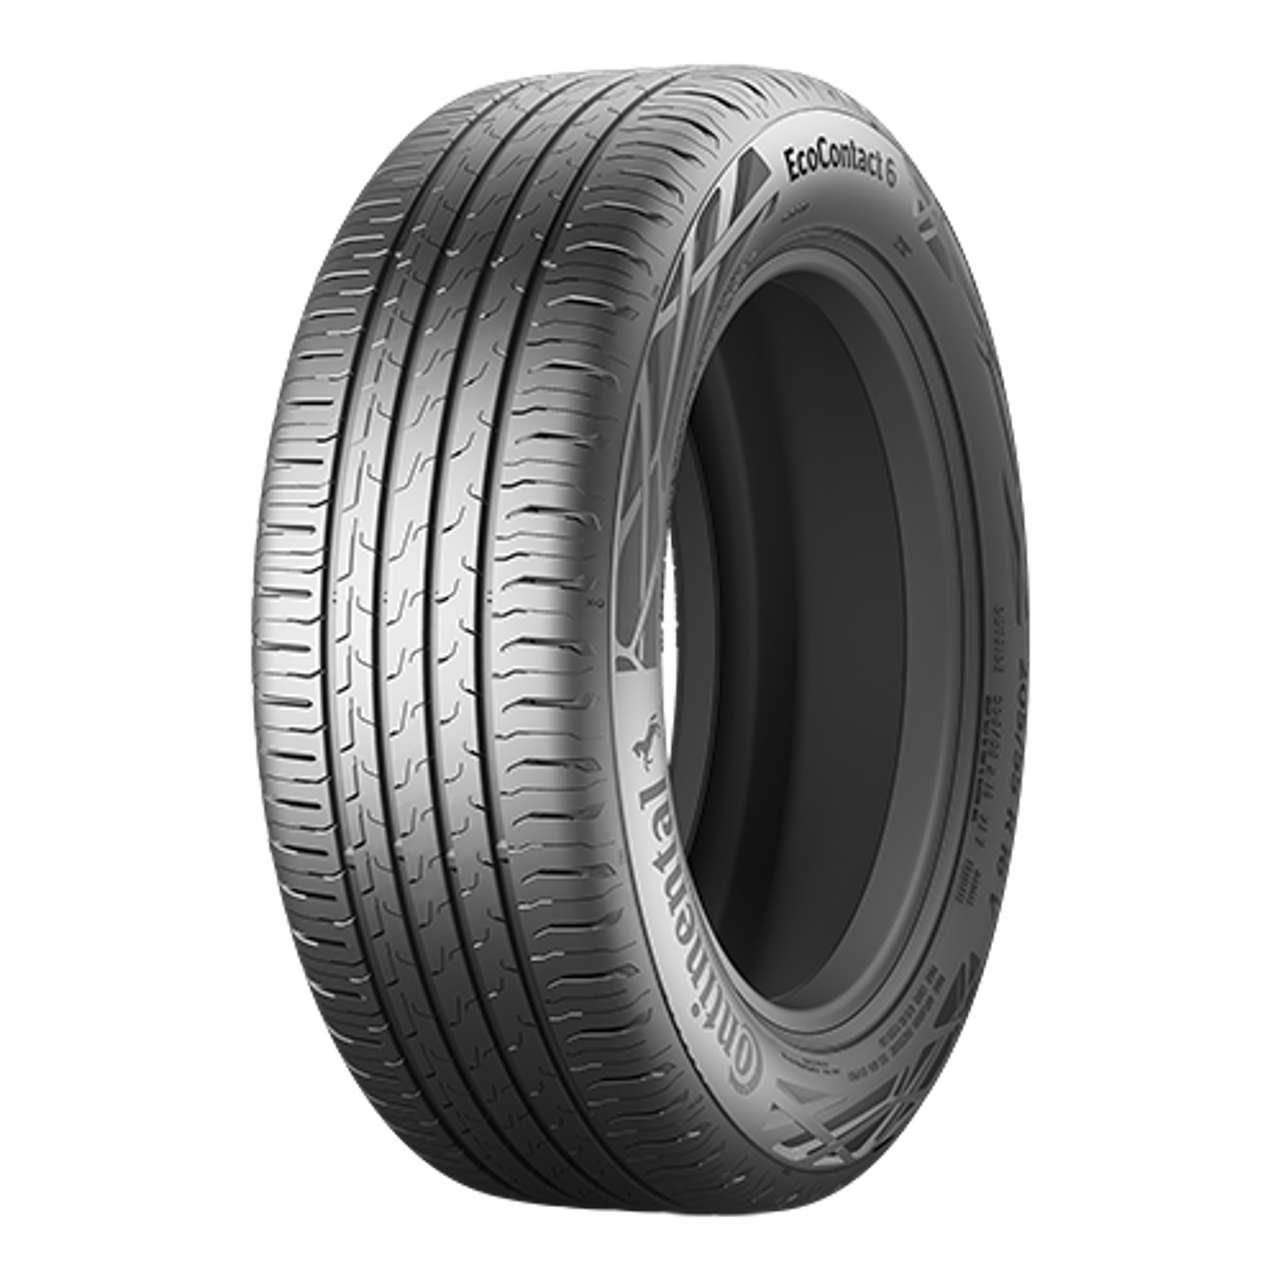 CONTINENTAL ECOCONTACT 6 (EVc) 195/55R16 91V von Continental